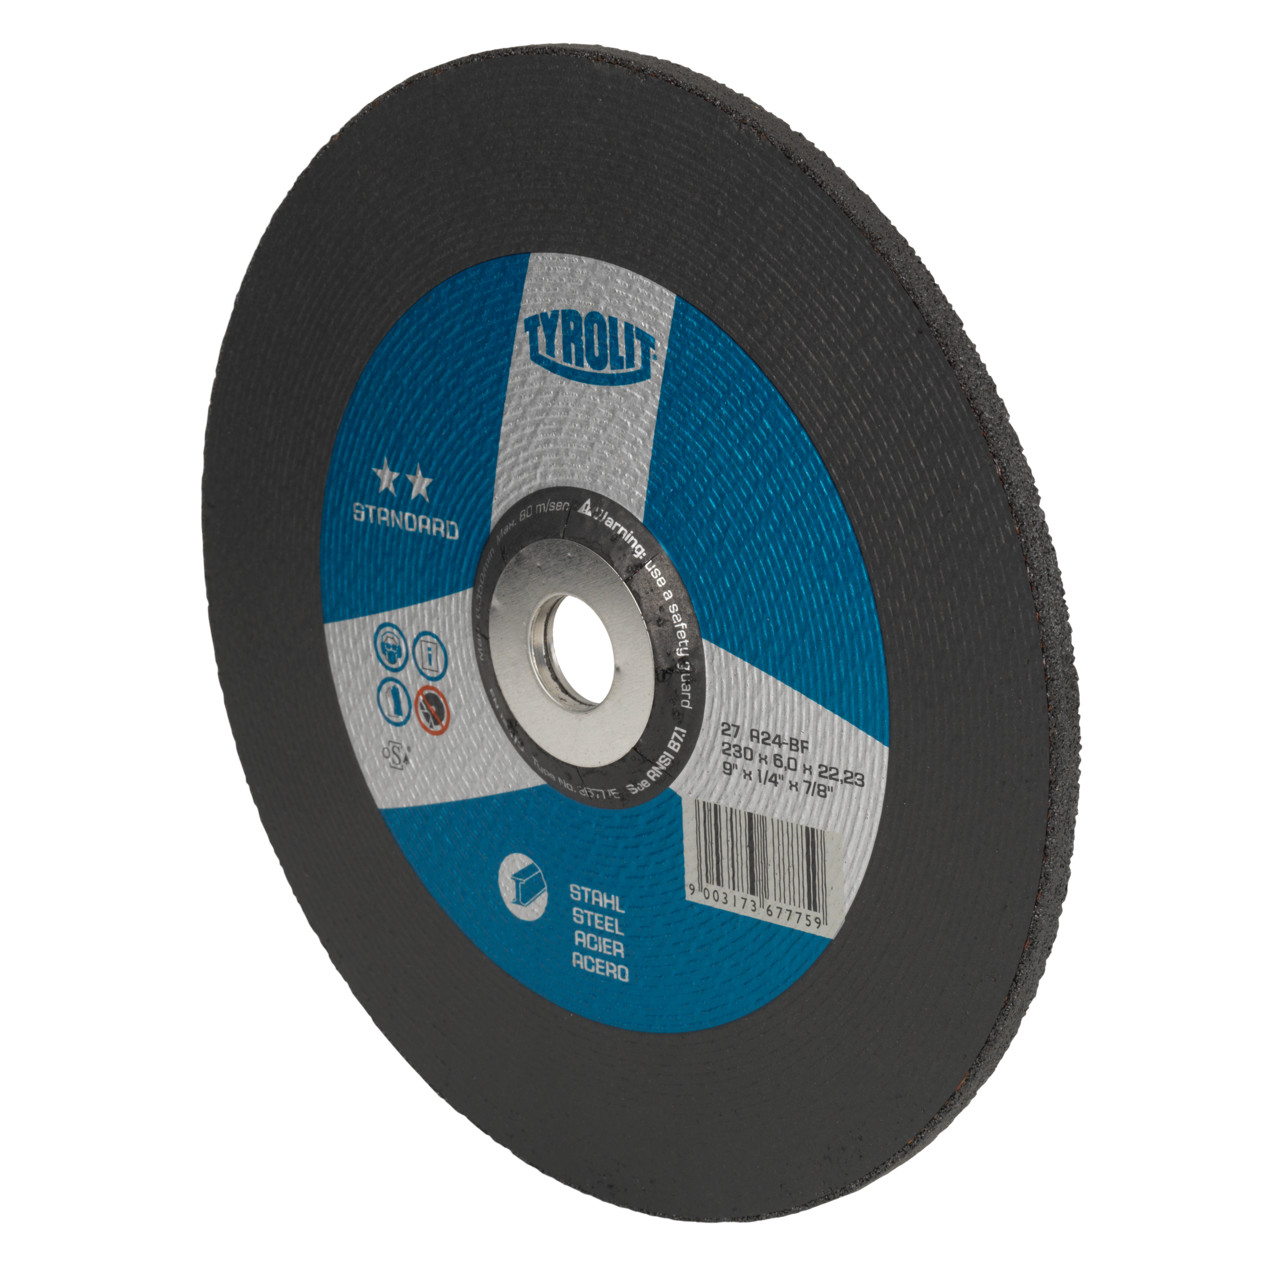 Tyrolit Roughing disc DxUxH 115x6x22.23 For steel, shape: 27 - offset version, Art. 367377